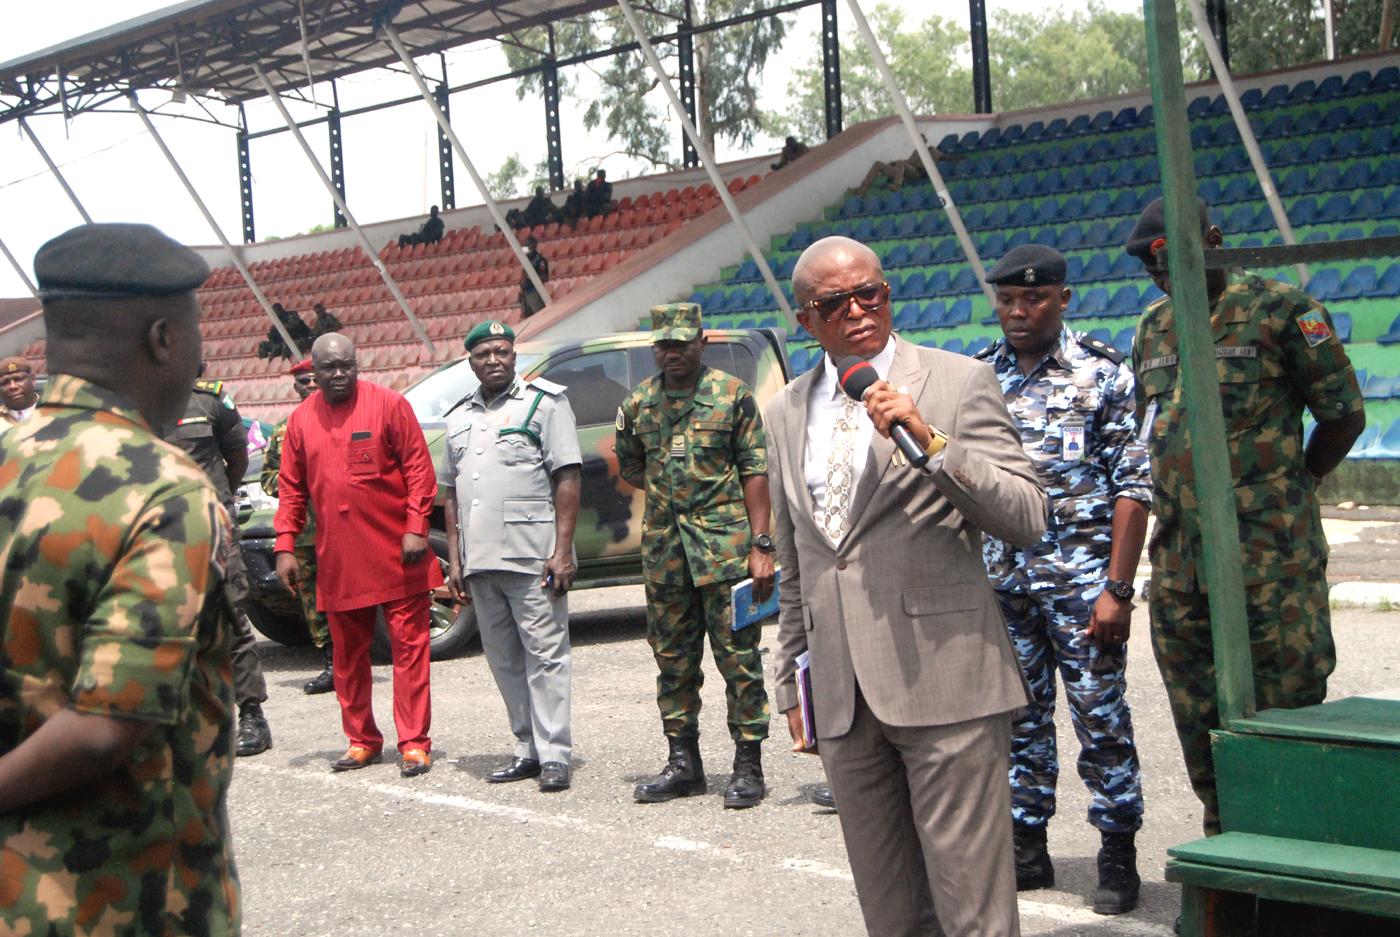 Governor Uzodinma ditches Ihedioha’s Iron Gate, kicks off Search and Flush Armed Joint Security Operation